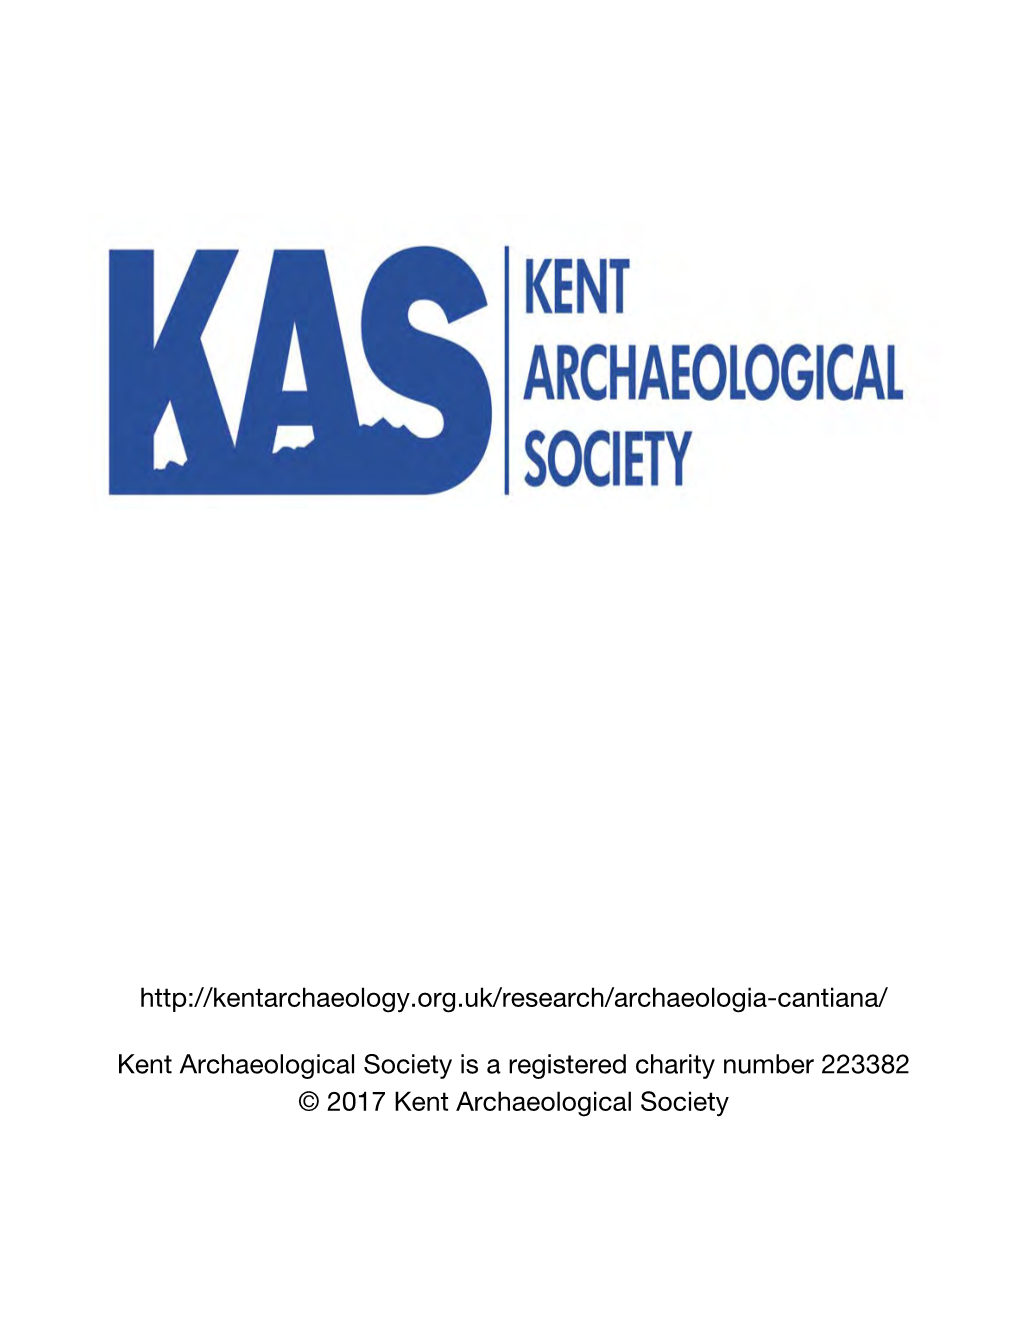 1978 93 Researches and Discoveries in Kent.Pdf